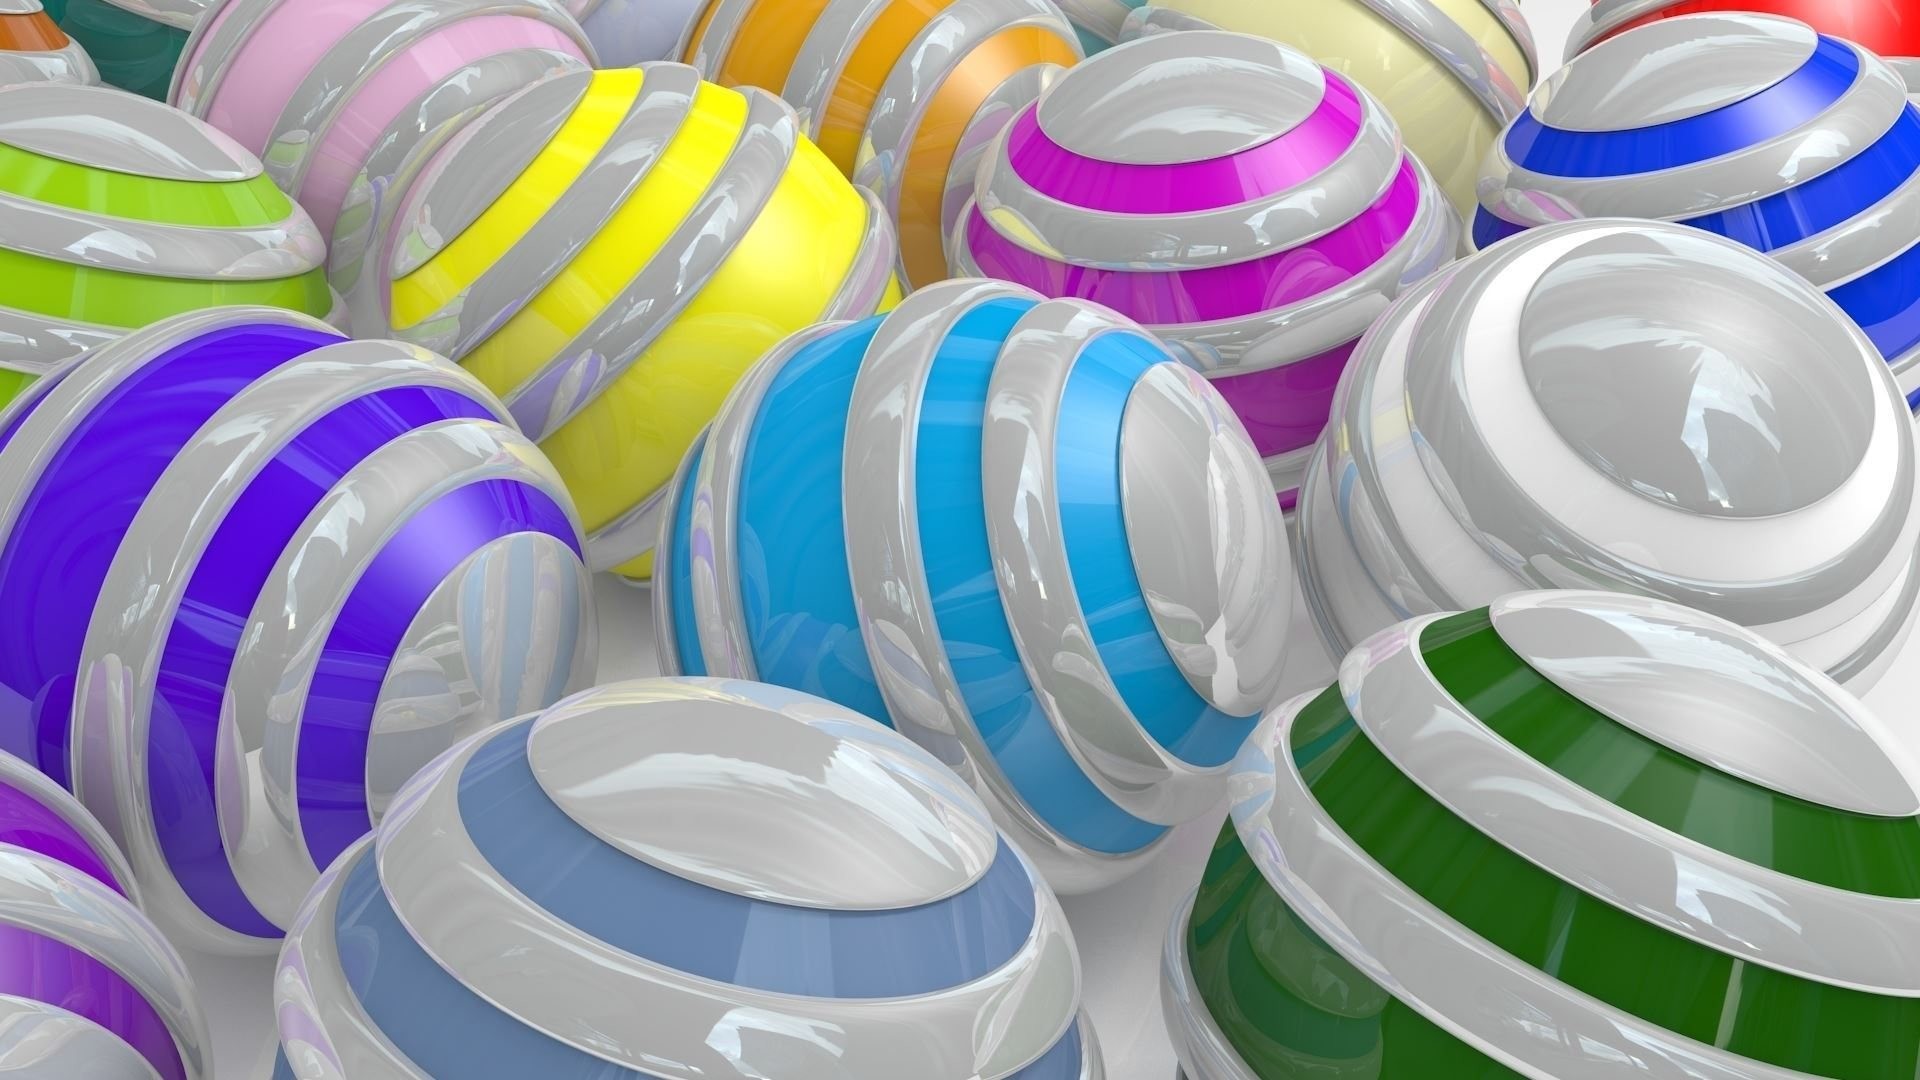 download 3d wallpaper for pc,plastic,circle,pattern,ball,bangle